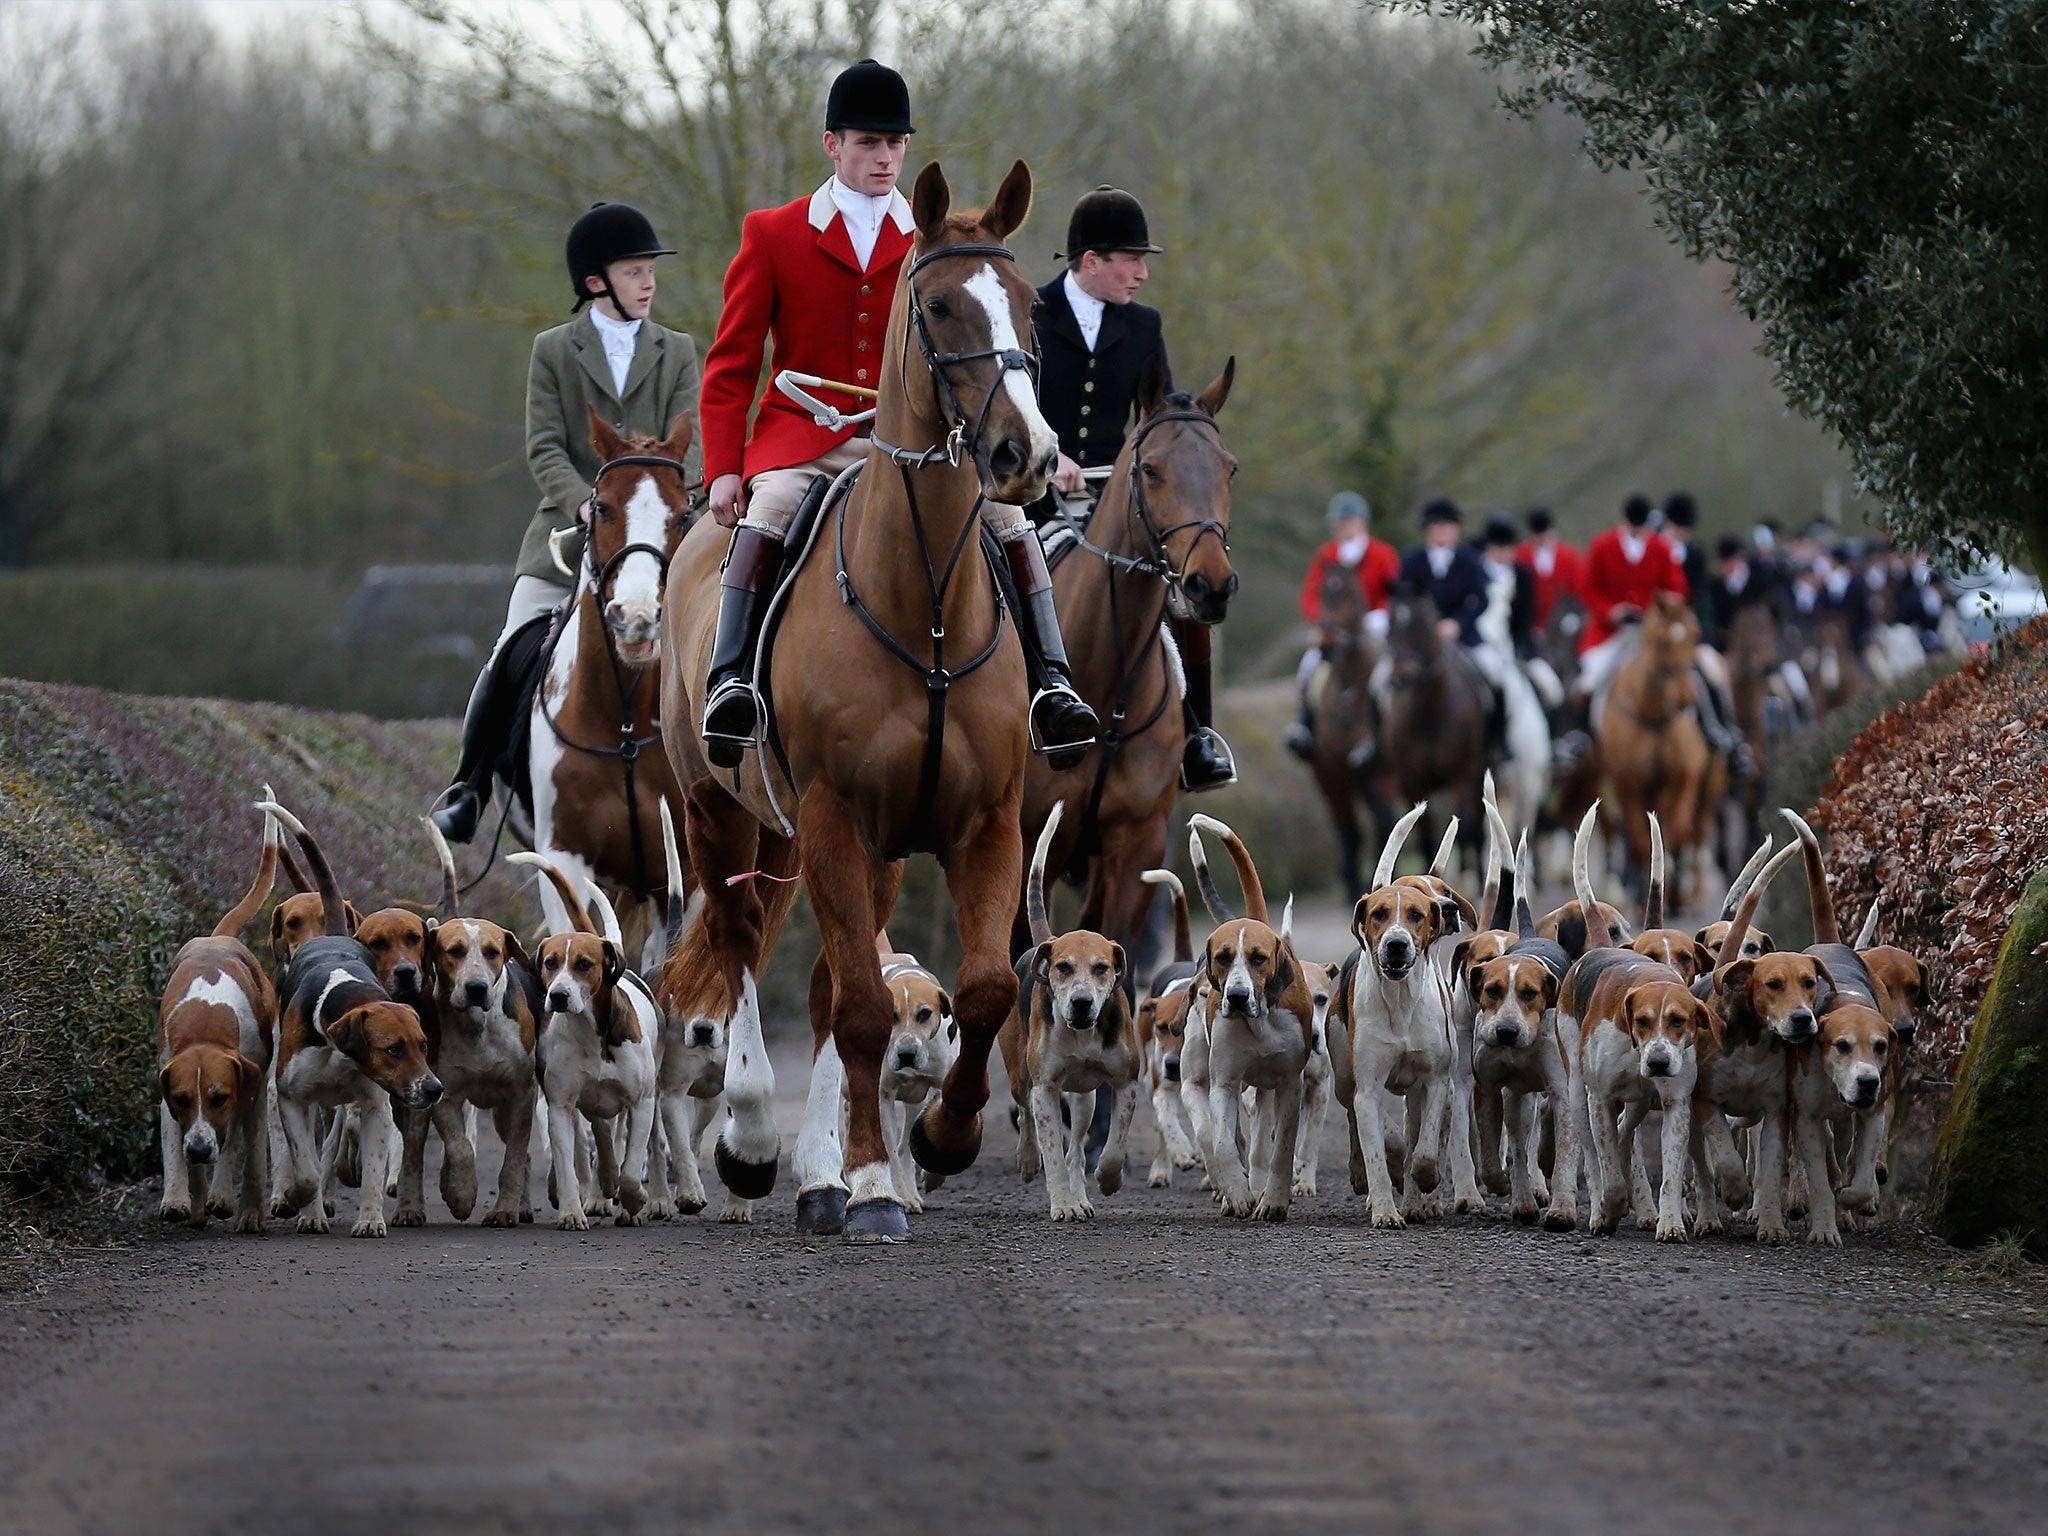 Anti-hunt campaigners claim illegal hunting of foxes has continued, including at large organised Boxing Day hunts